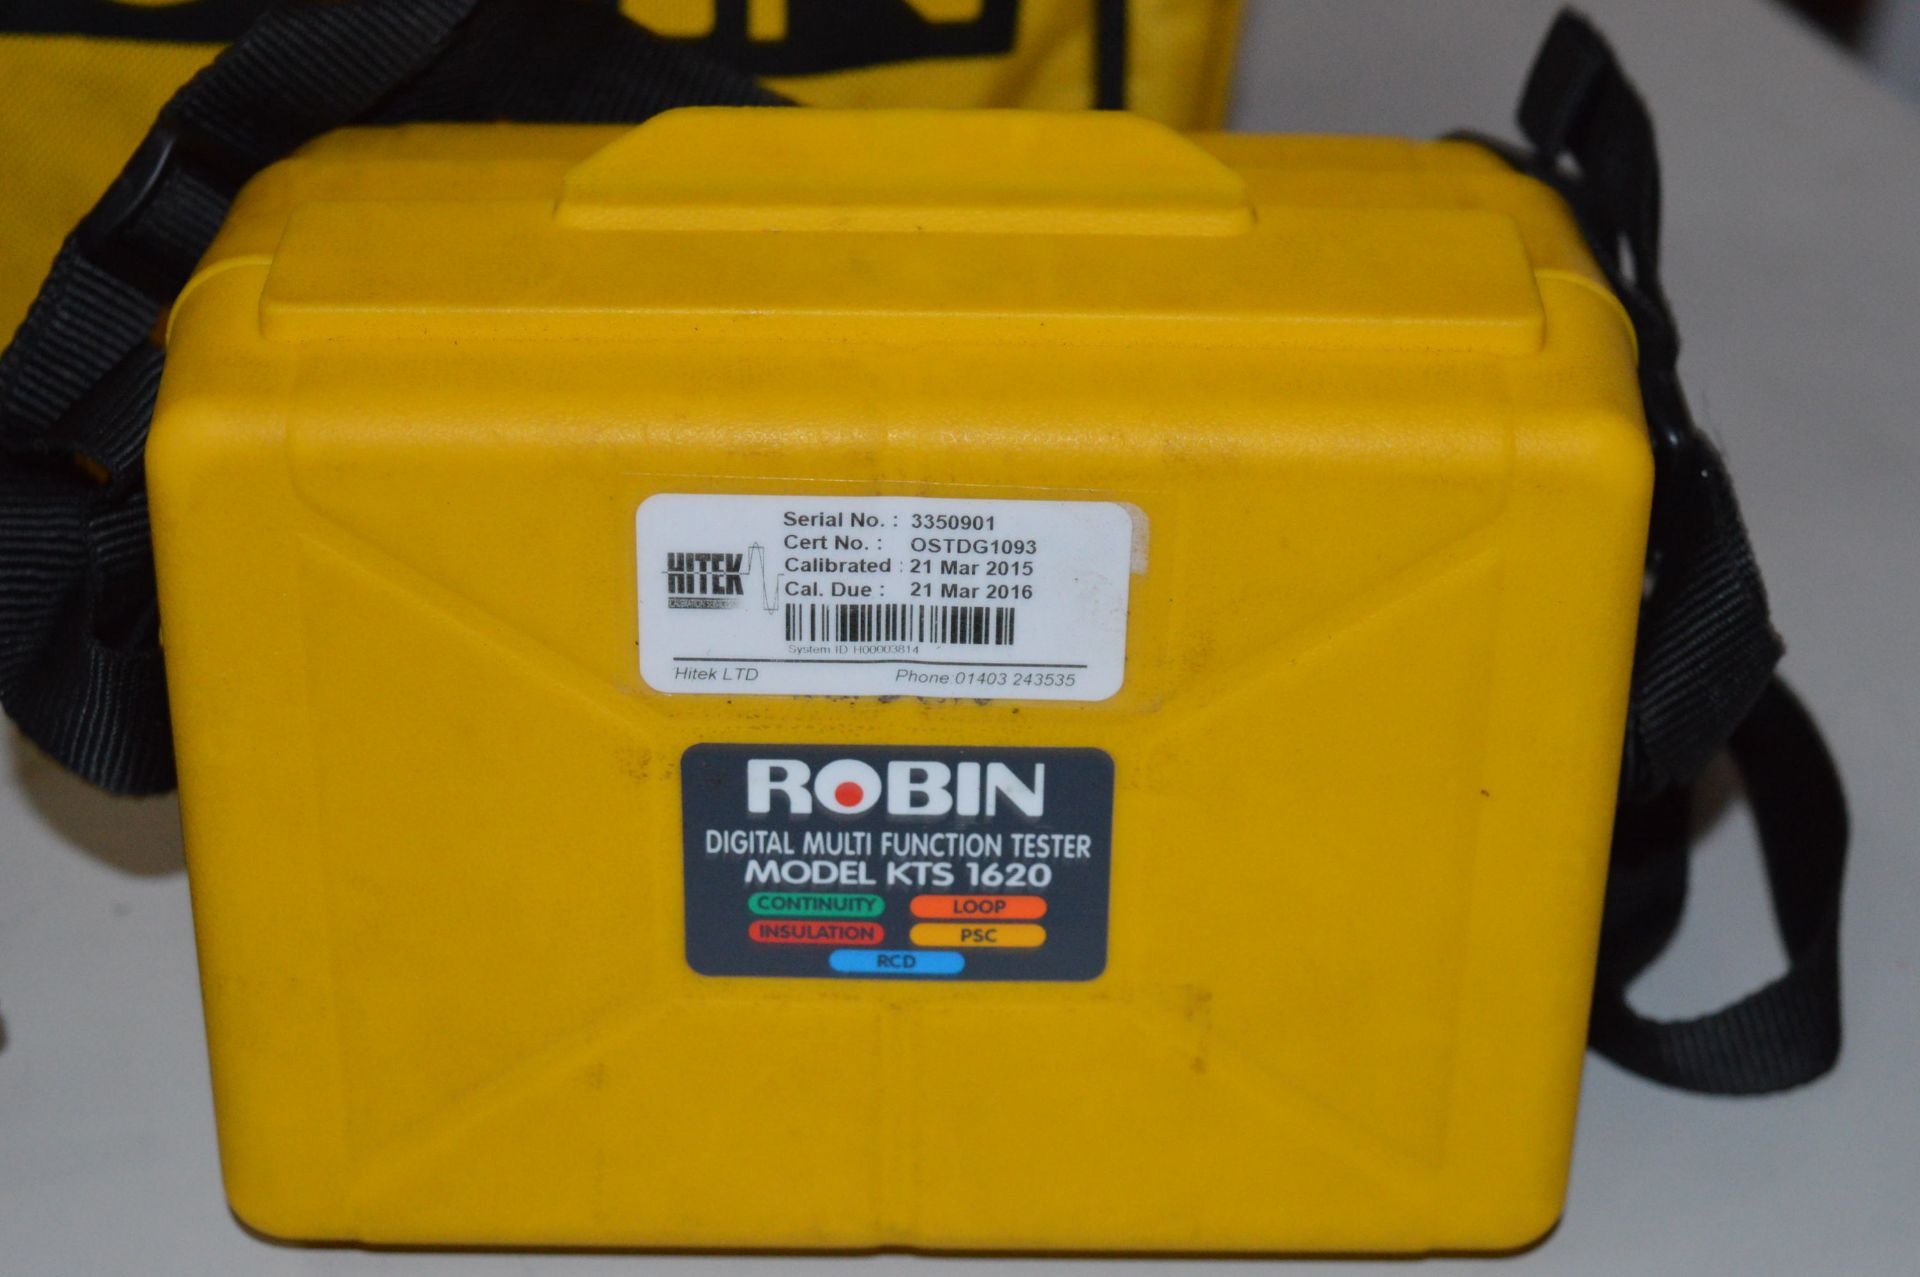 1 x Robin 5 in 1 Multi Function Tester - Model KTS 1620 - Includes Case and Cables - For The Testing - Image 5 of 8